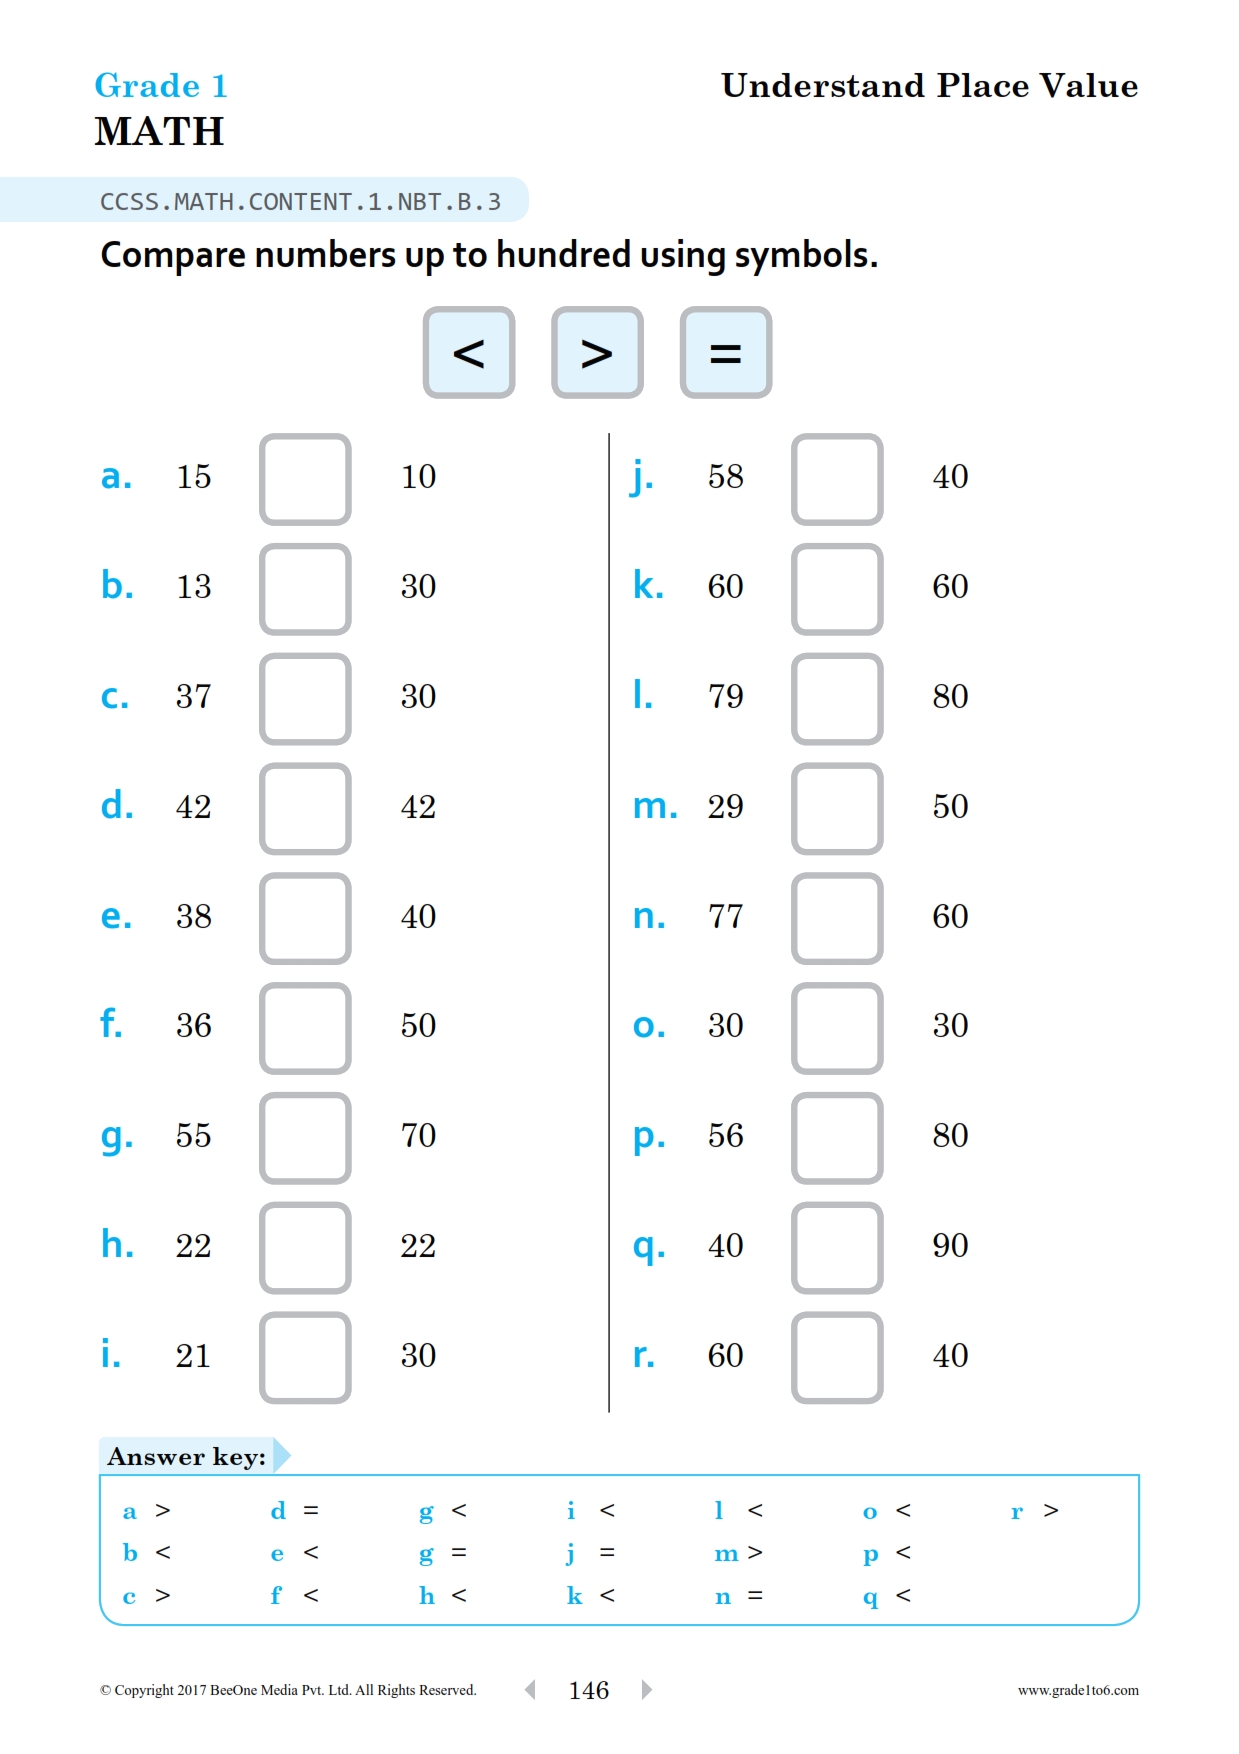 comparing-numbers-to-100-worksheets-grade1to6